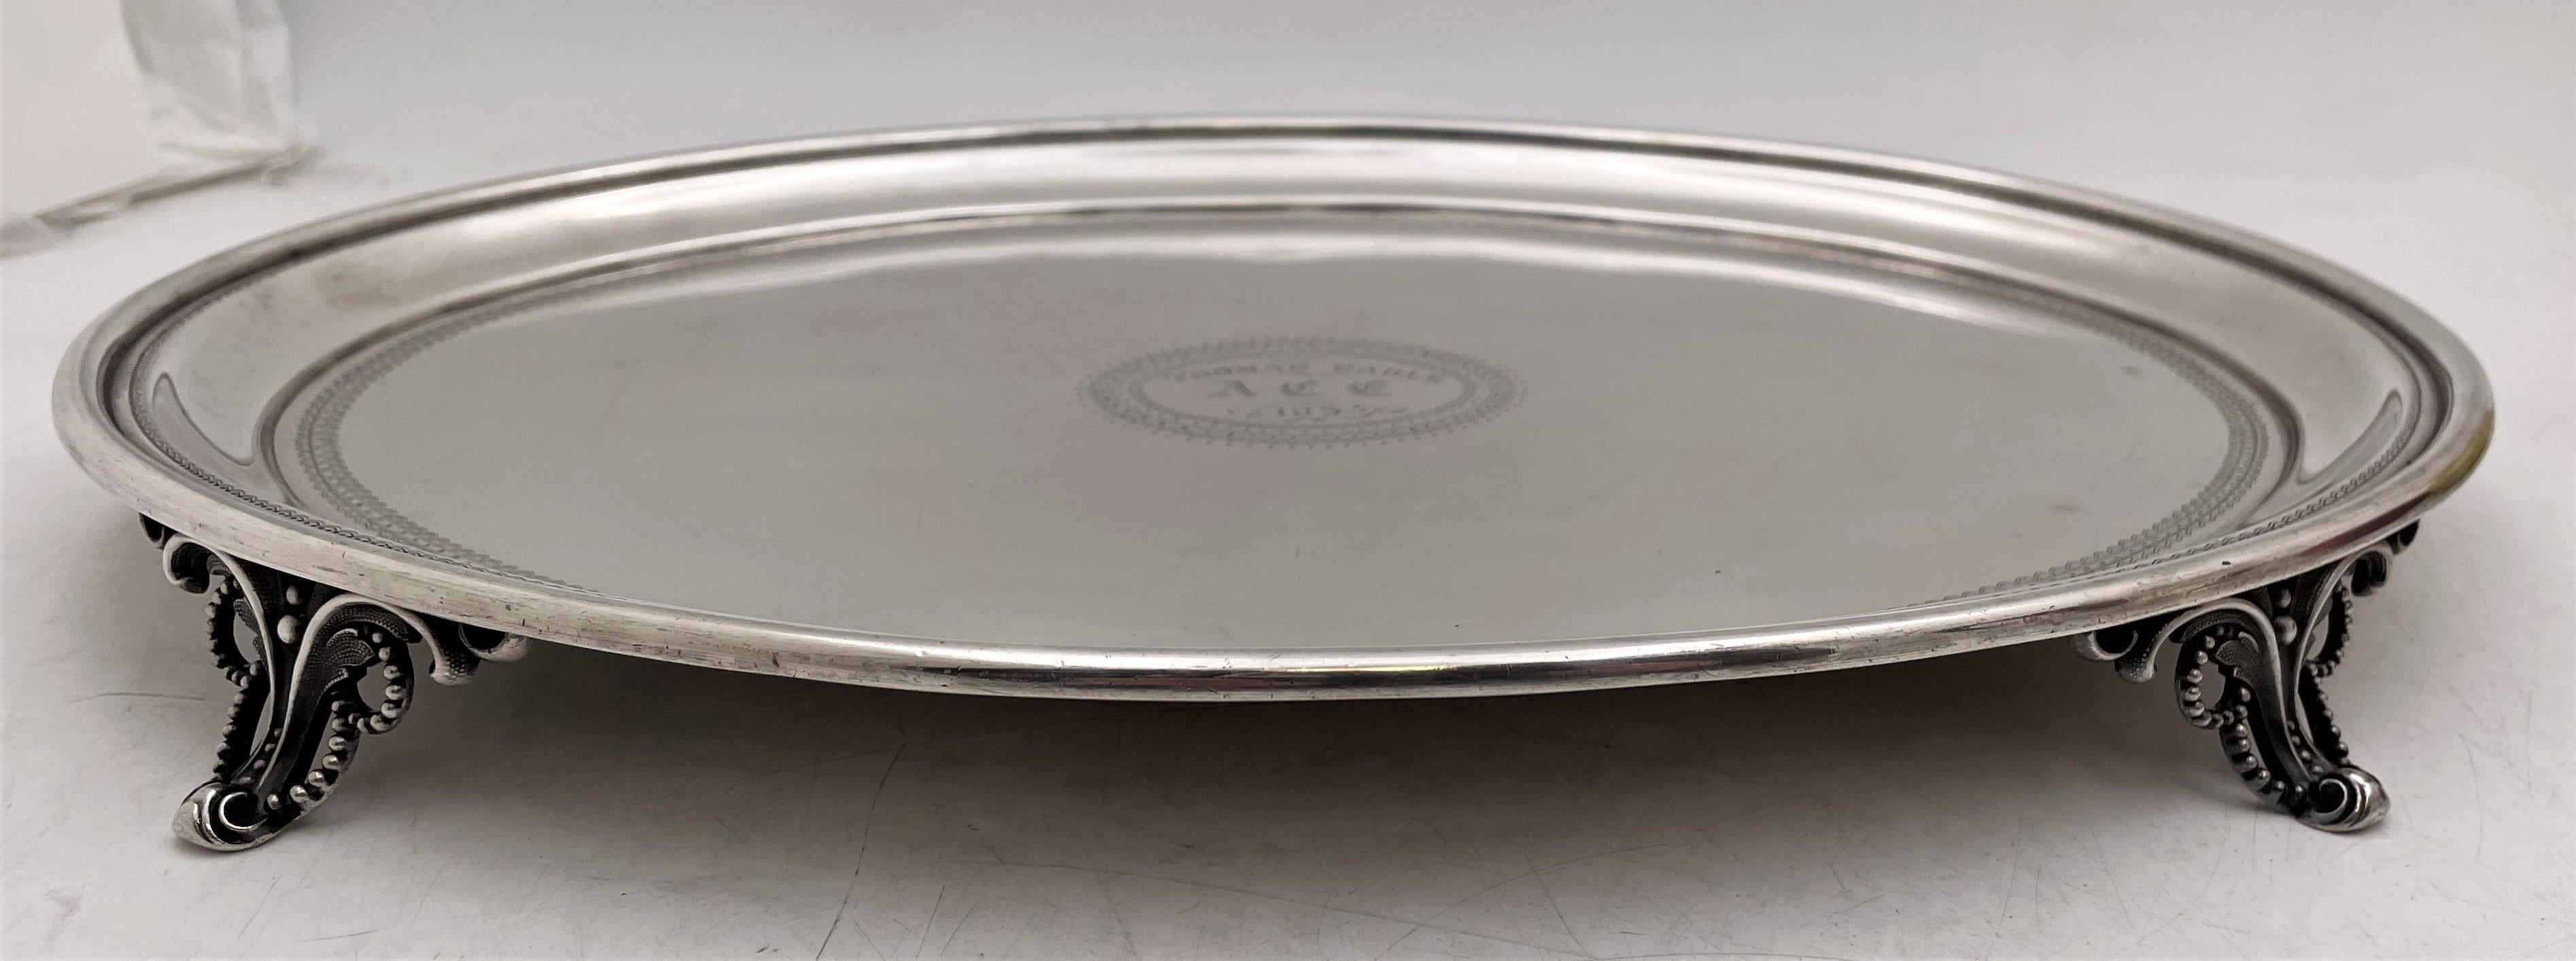 American Bailey & Co. Sterling Silver Salver/ Raised Dish from 1850s For Sale